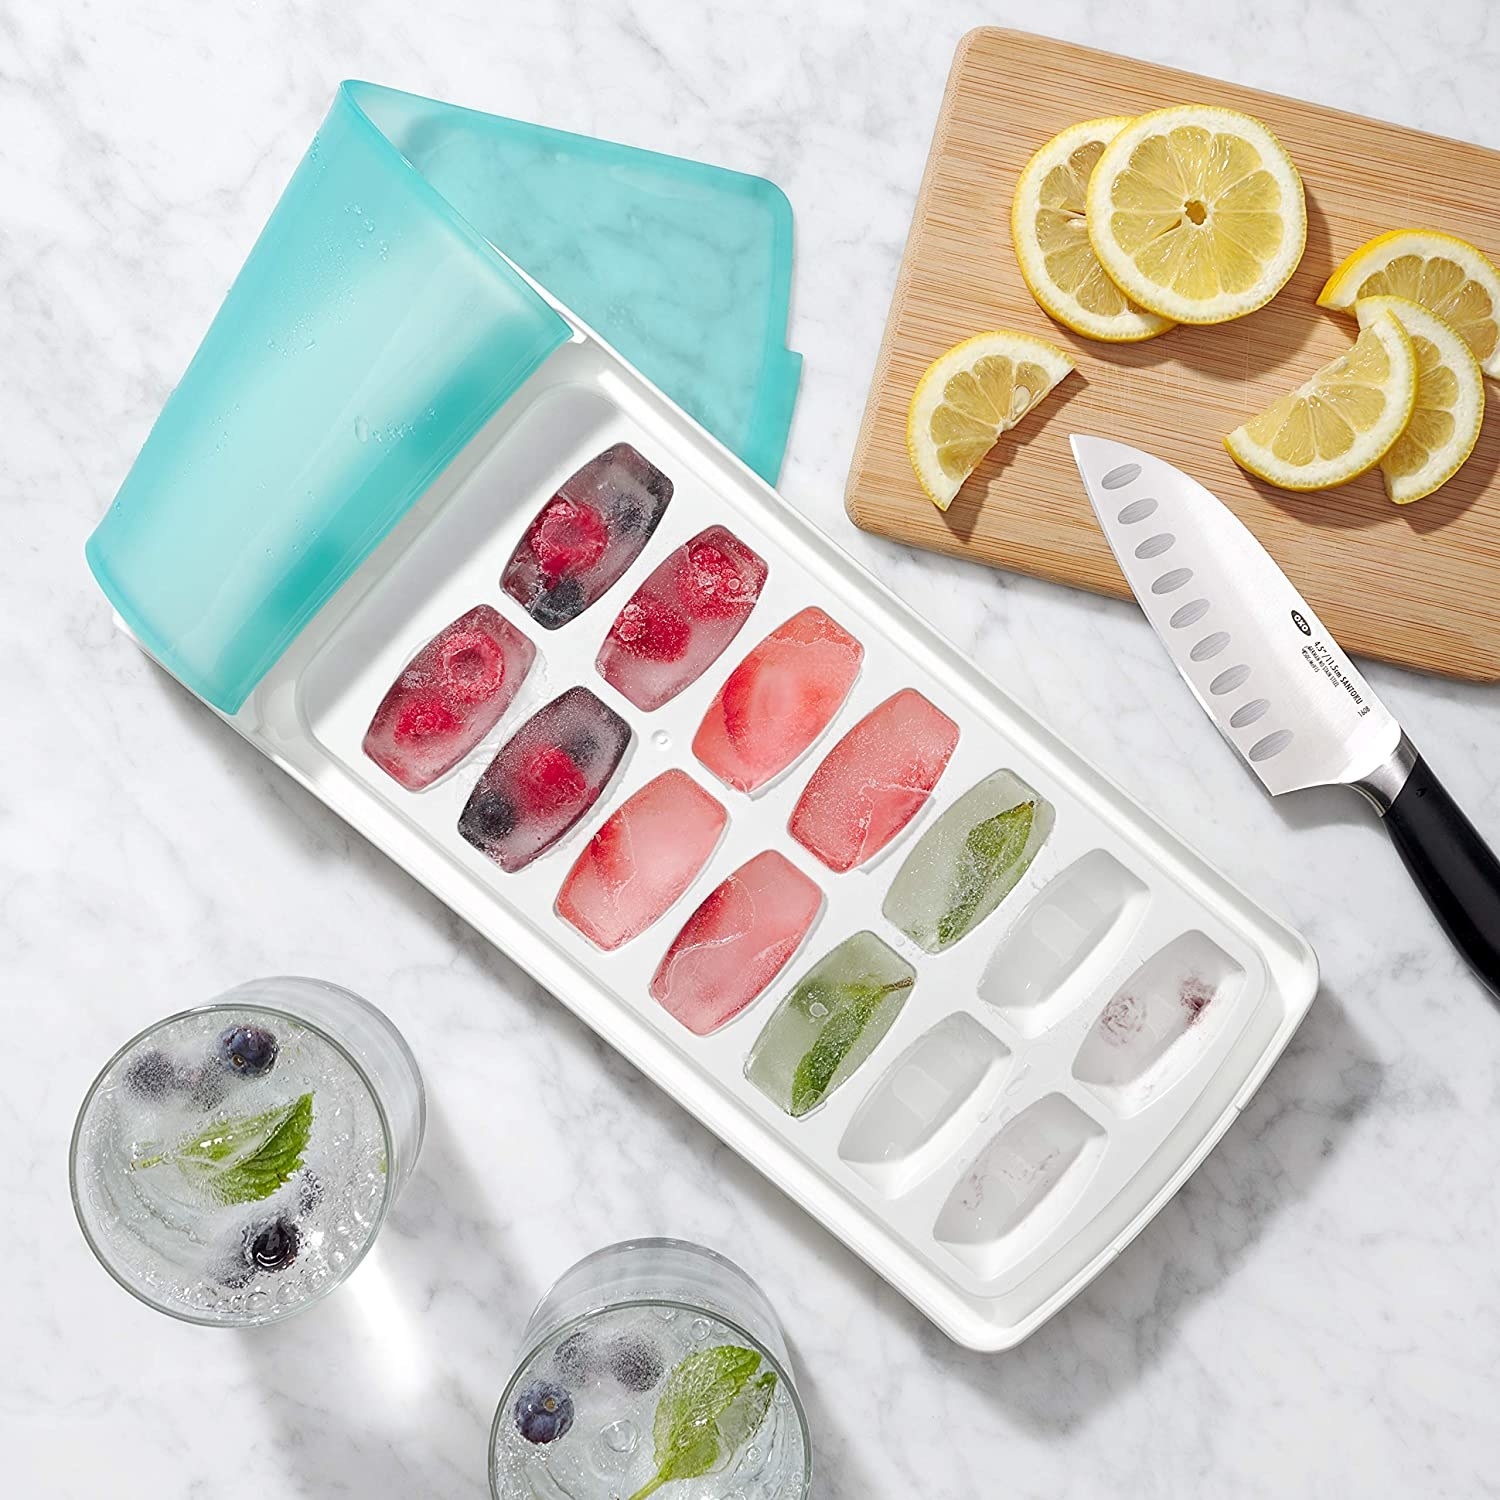 the ice tray with the soft silicone lid peeled back